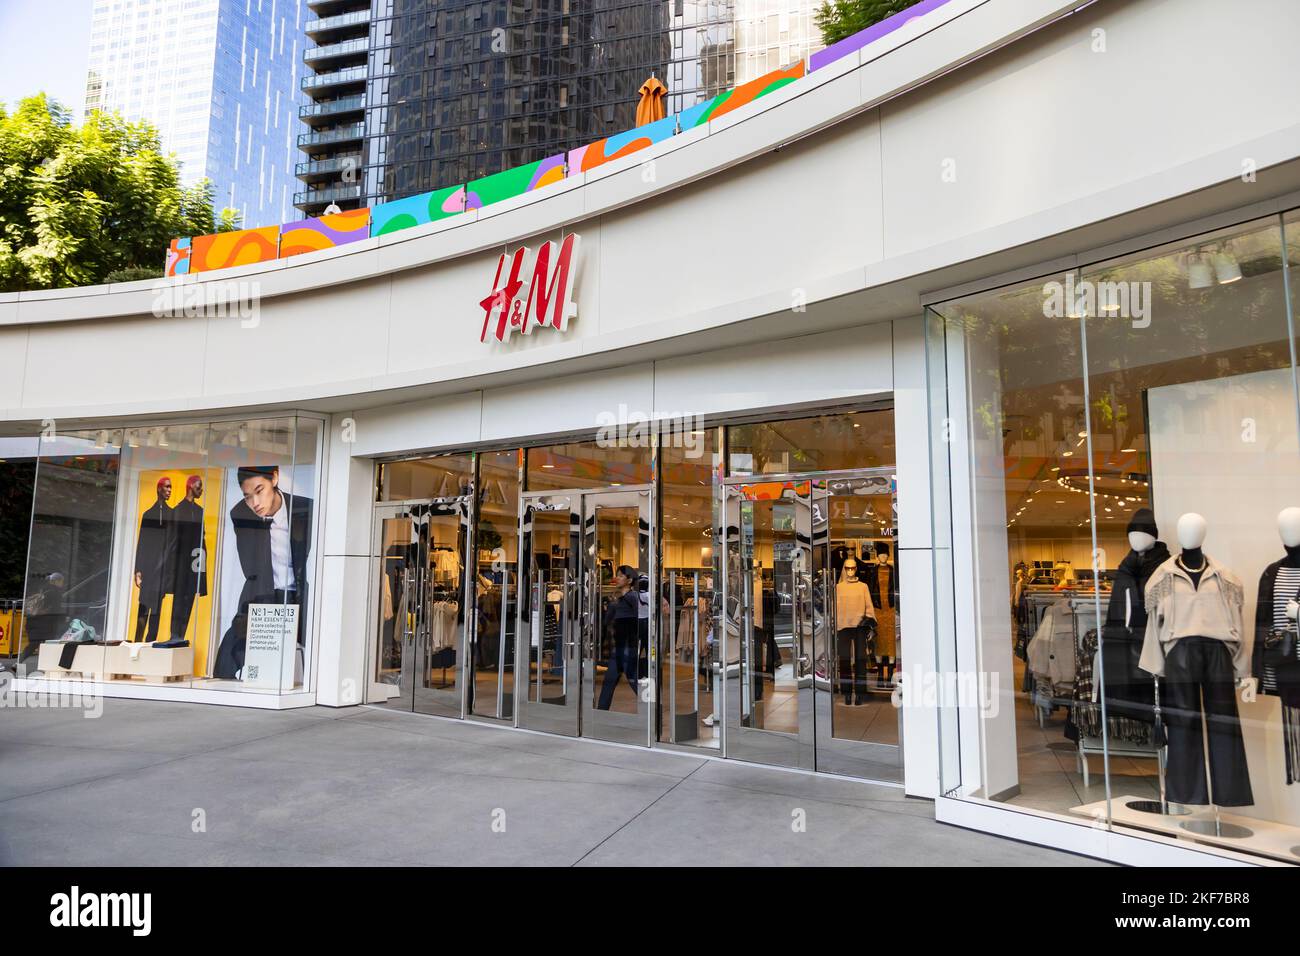 los Angeles, CA - November 2022: H&M store in shopping mall. H&M is a multinational clothing company based in Sweden that focuses on fashion clothing. Stock Photo